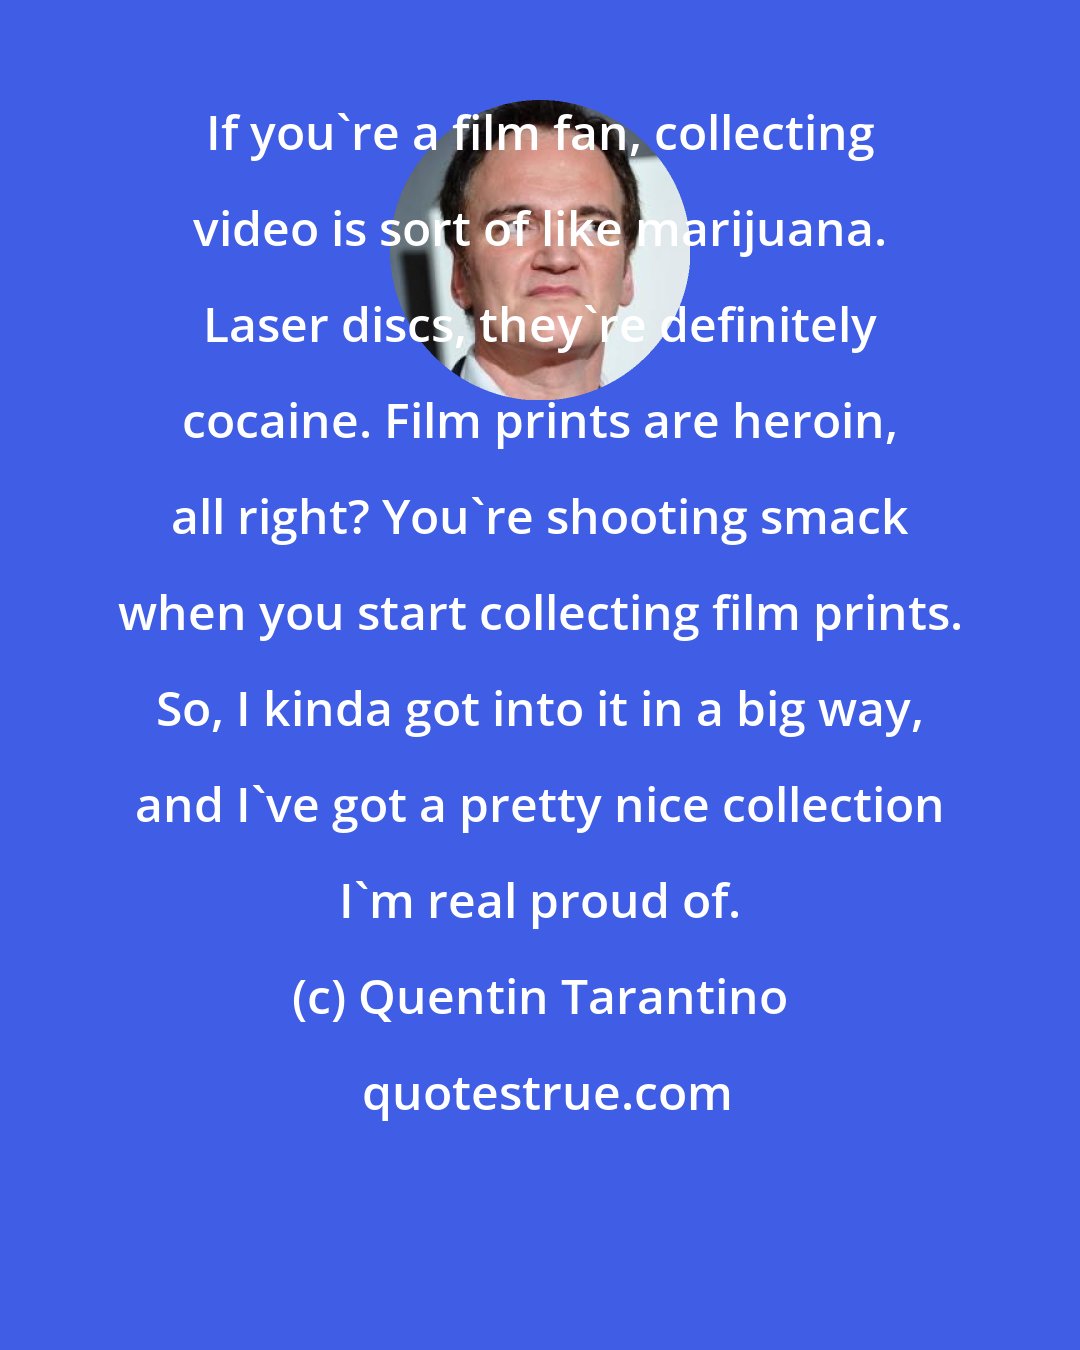 Quentin Tarantino: If you're a film fan, collecting video is sort of like marijuana. Laser discs, they're definitely cocaine. Film prints are heroin, all right? You're shooting smack when you start collecting film prints. So, I kinda got into it in a big way, and I've got a pretty nice collection I'm real proud of.